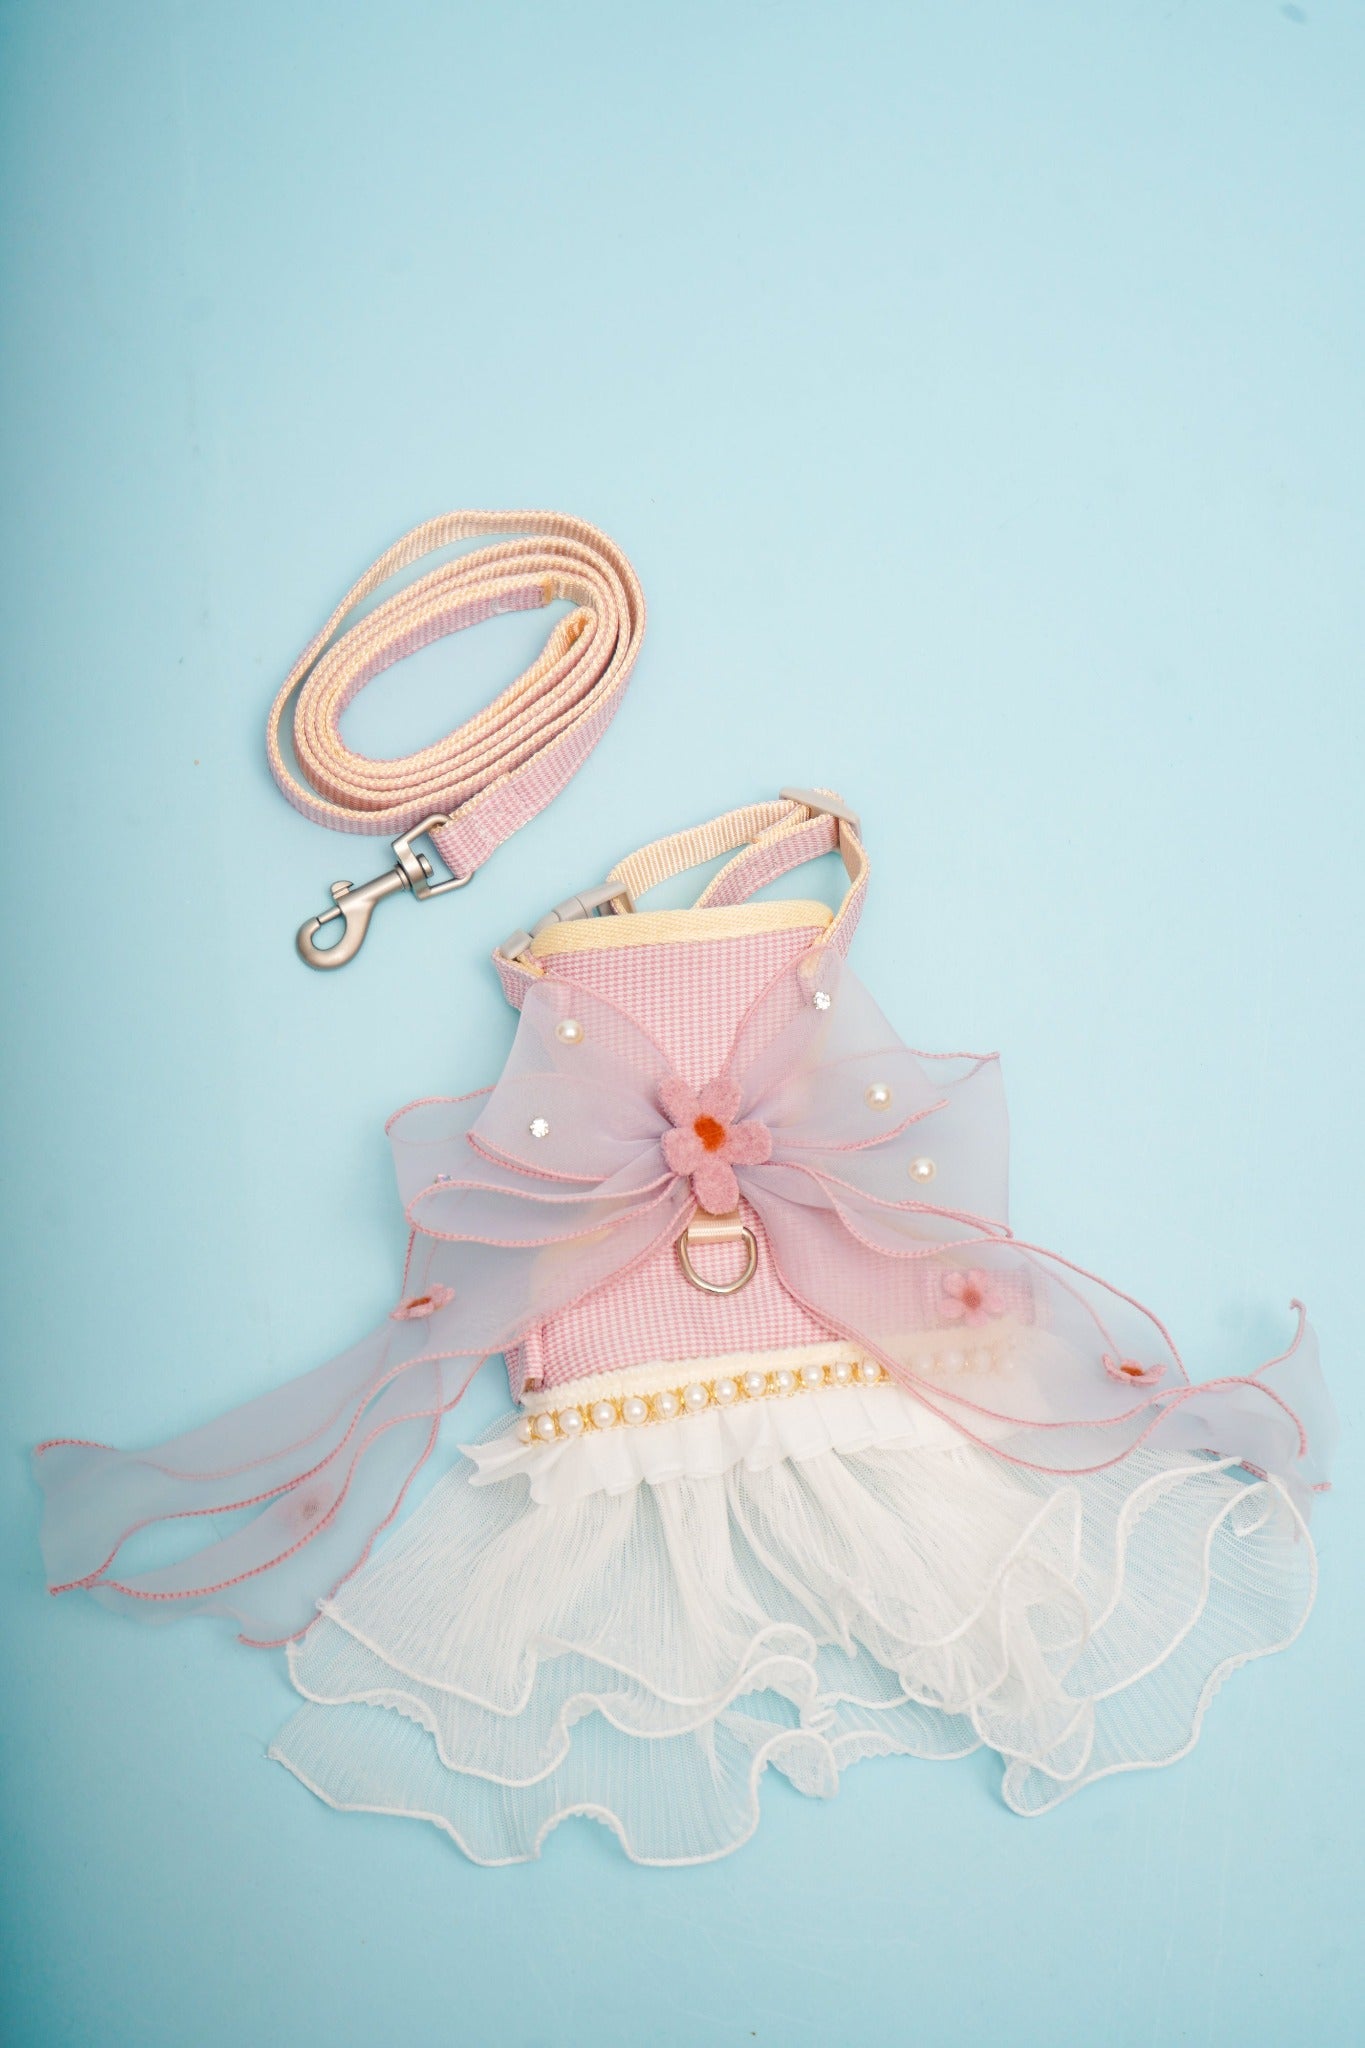 Pink Snow White Harness Dress For Cat (leash included)